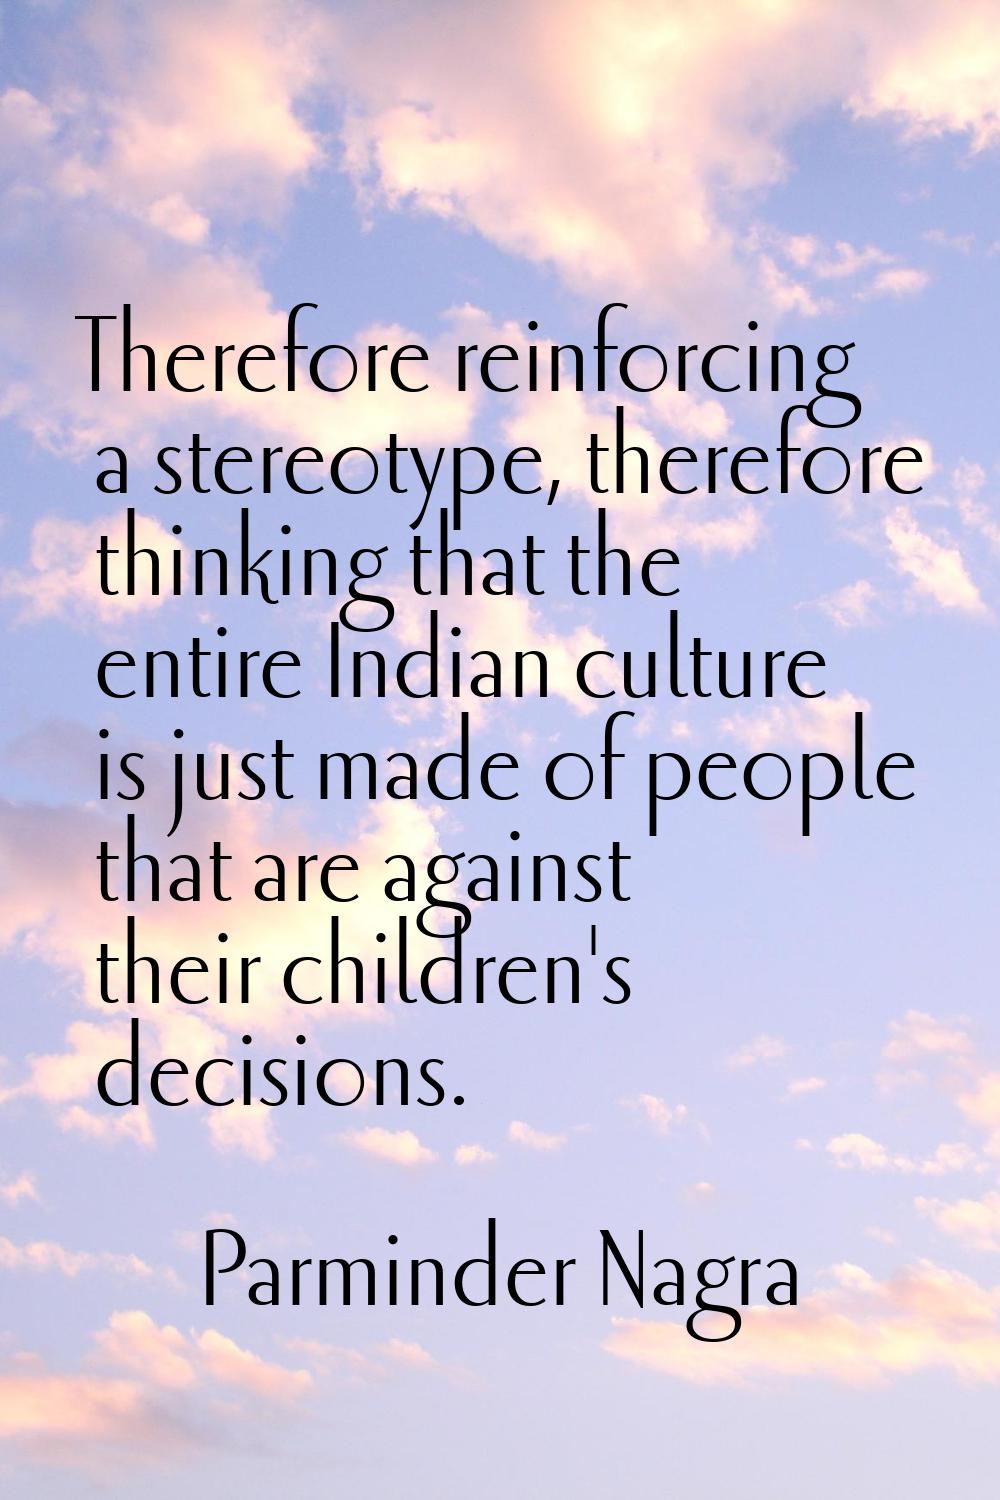 Therefore reinforcing a stereotype, therefore thinking that the entire Indian culture is just made 